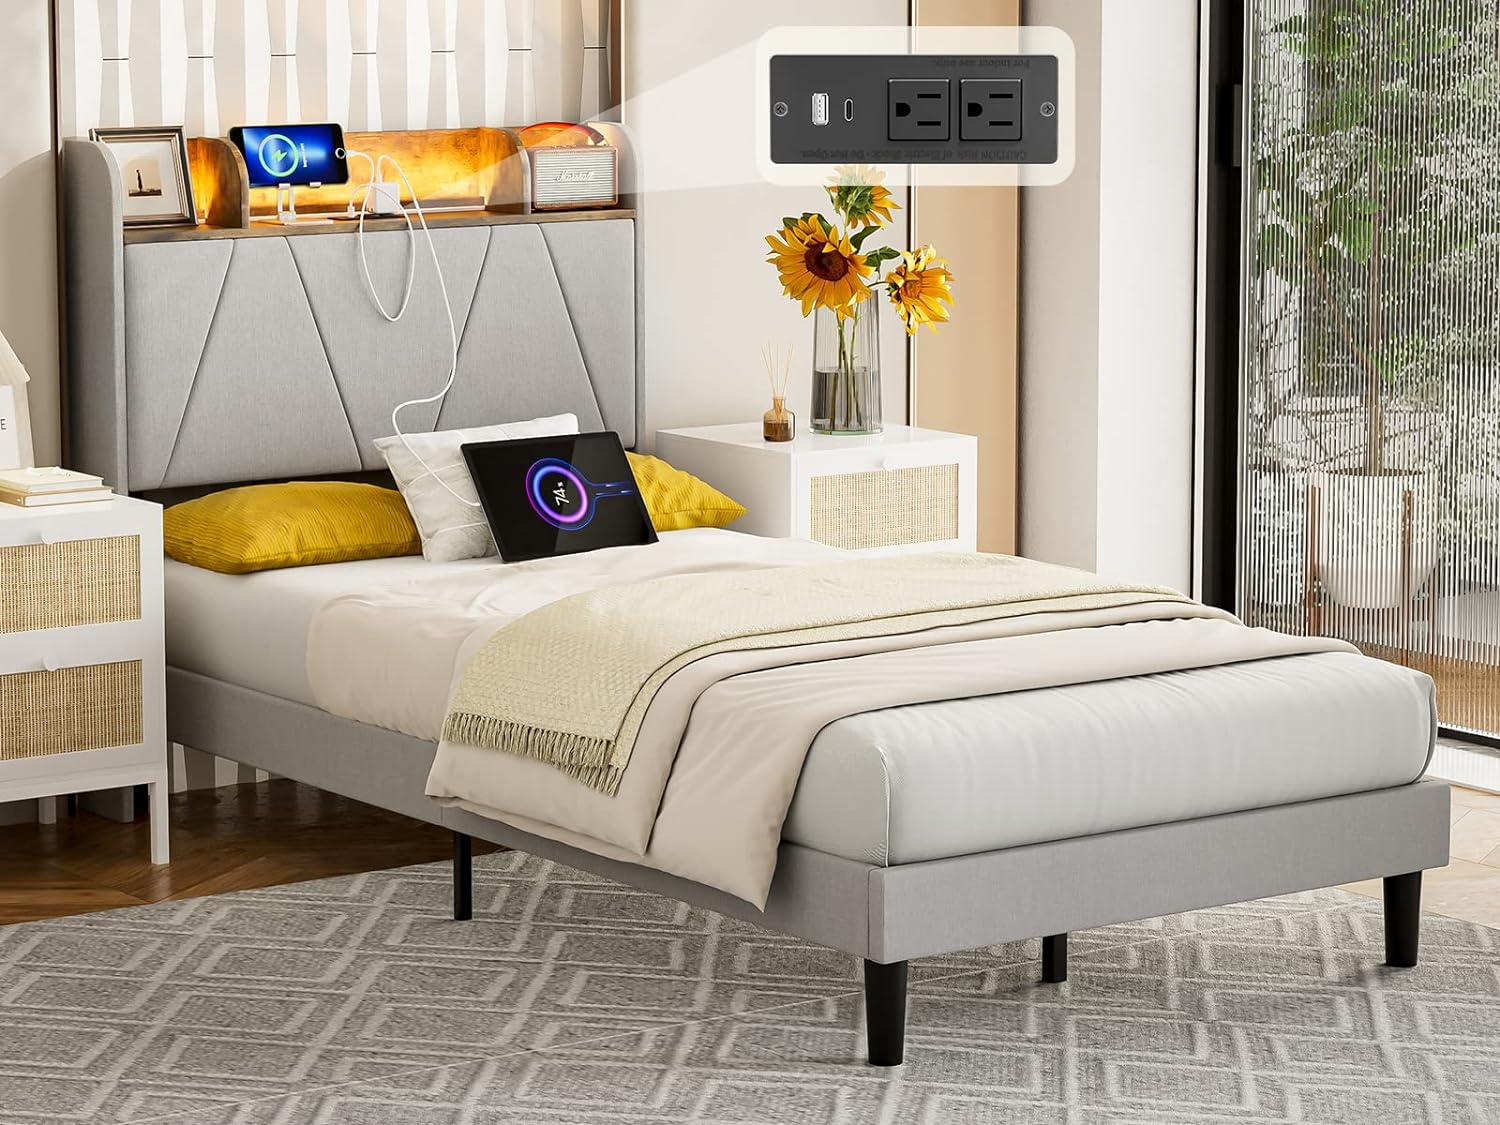 IKIFLY Twin XL Bed Frames with Storage Shelf Headboard & Charging Station, Upholstered Platform Bed with LED Lights, Solid Wood Slats, Noise-Free, No Box Spring Needed, Easy Assembly - Light Grey